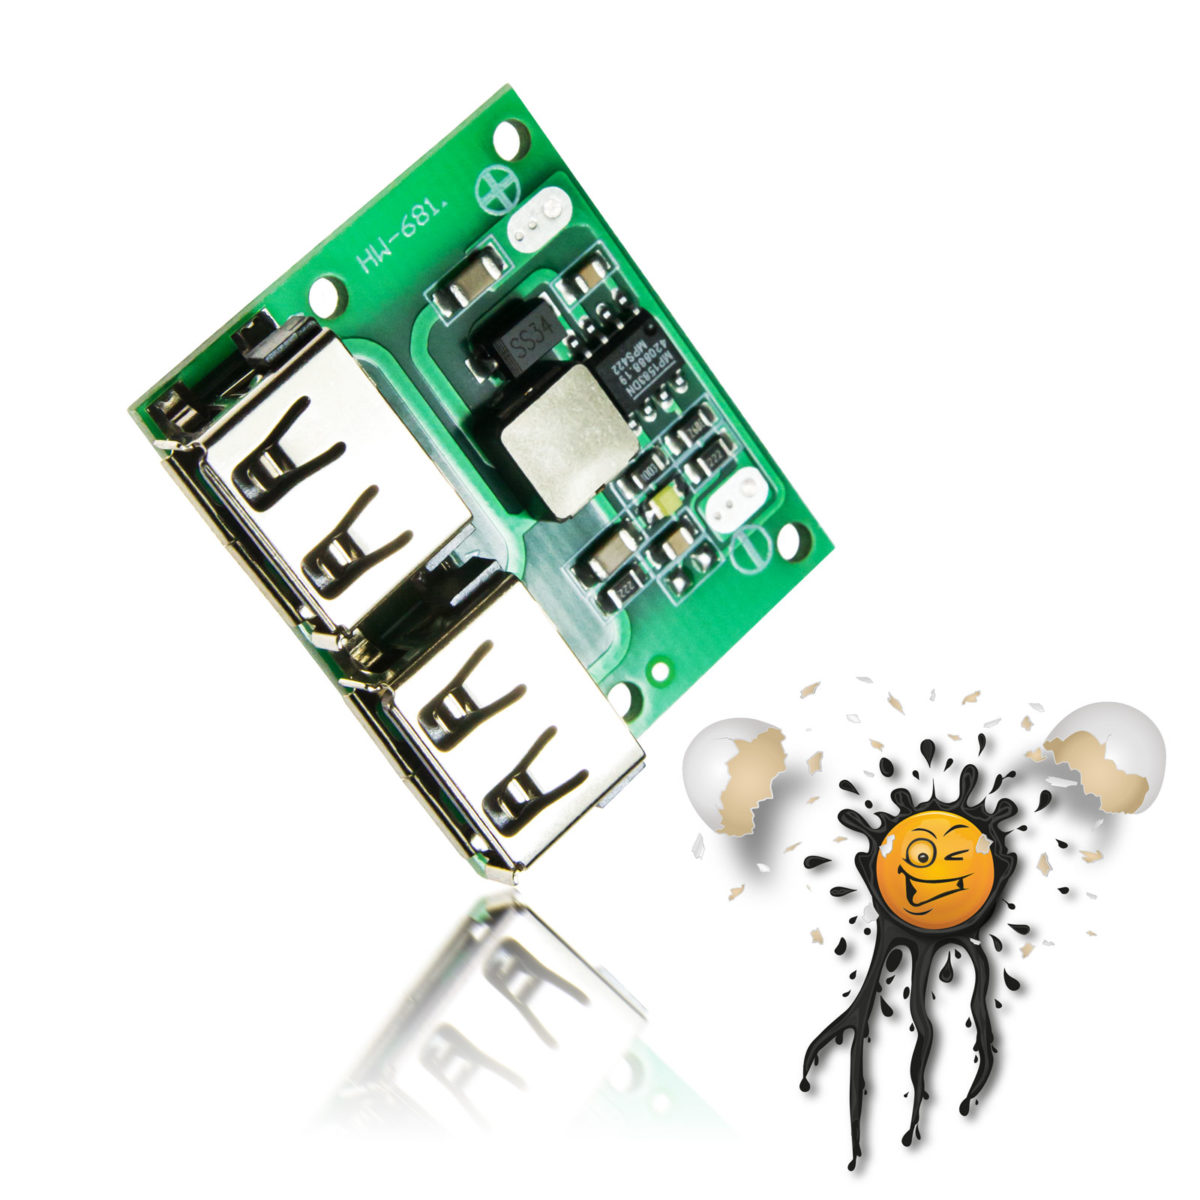 5V USB Spannungswandler dual – IoT powered by